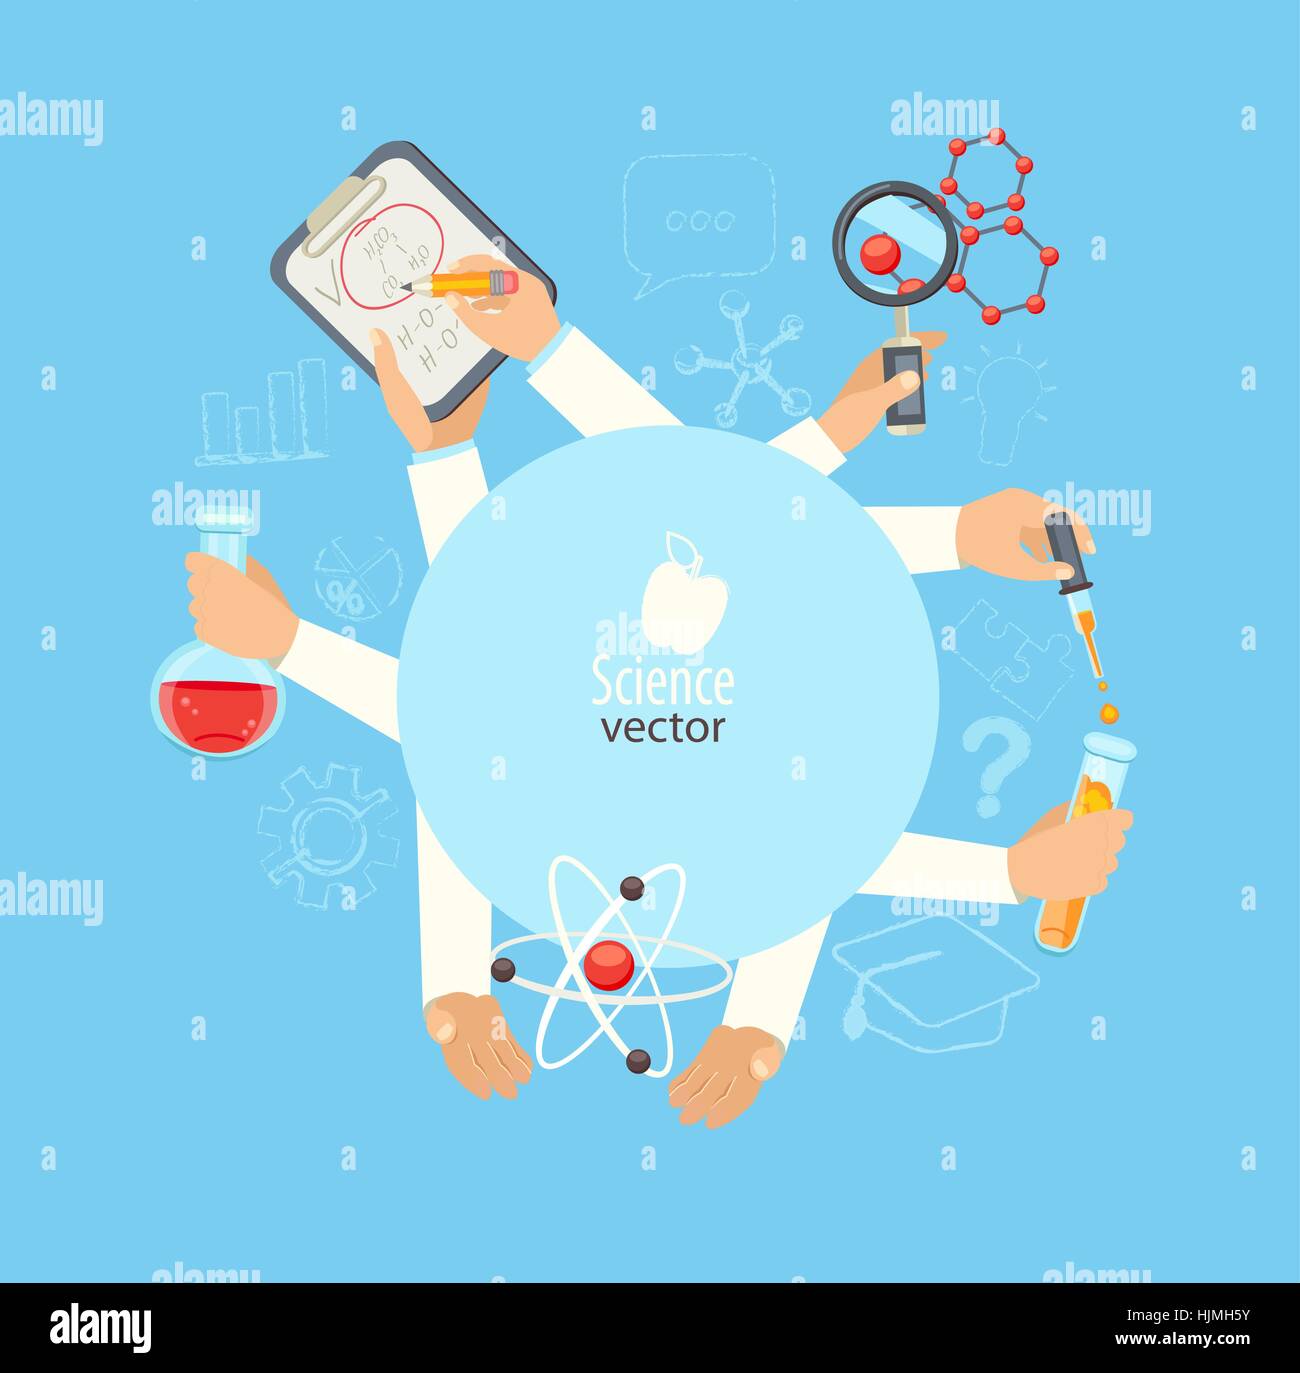 The concept of science and education. Scientists with molecules, formula, bulb, vector illustration. Stock Vector